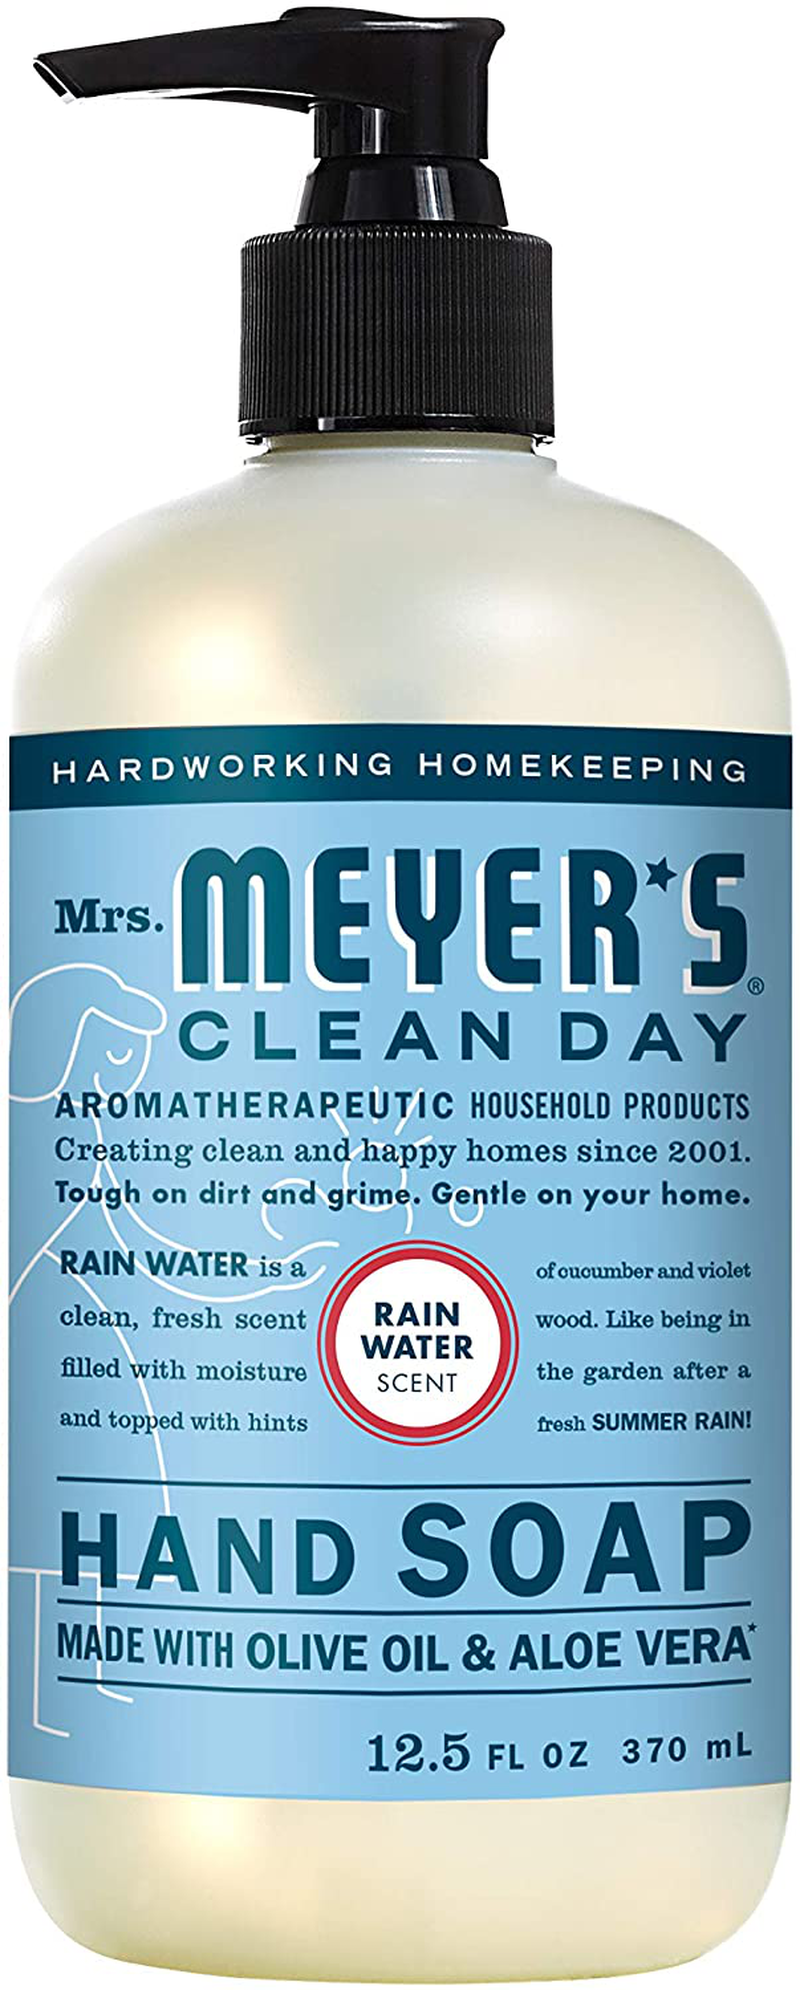 Mrs. Meyer's Clean Day Liquid Hand Soap, Cruelty Free and Biodegradable Hand Wash Formula Made with Essential Oils, Rain Water Scent, 12.5 oz Bottle